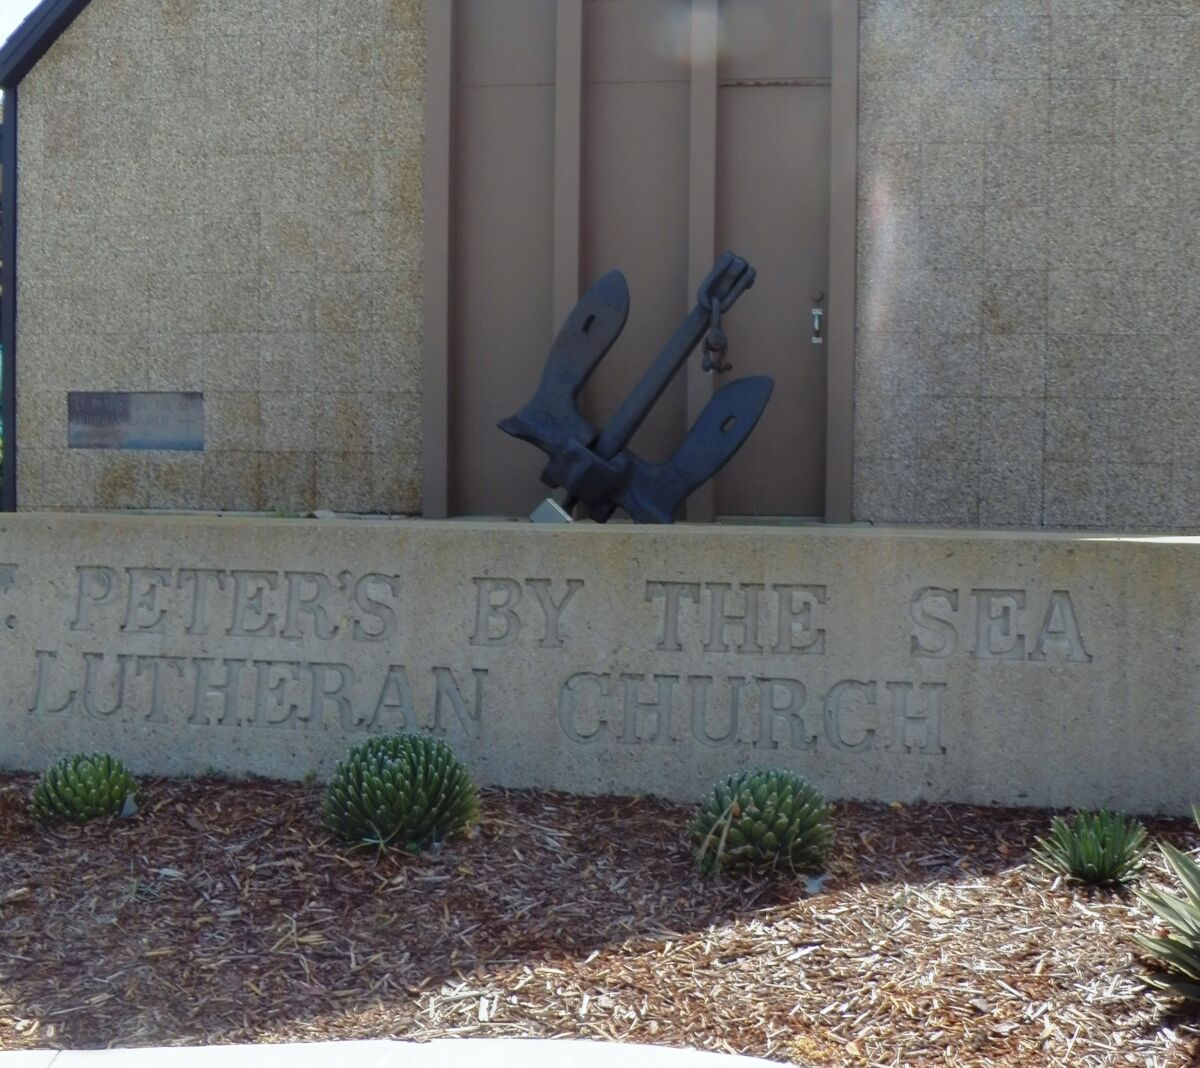 The anchor fronting Sunset Cliffs Boulevard is one of St. Peter’s by the Sea Lutheran Church's several sea images.